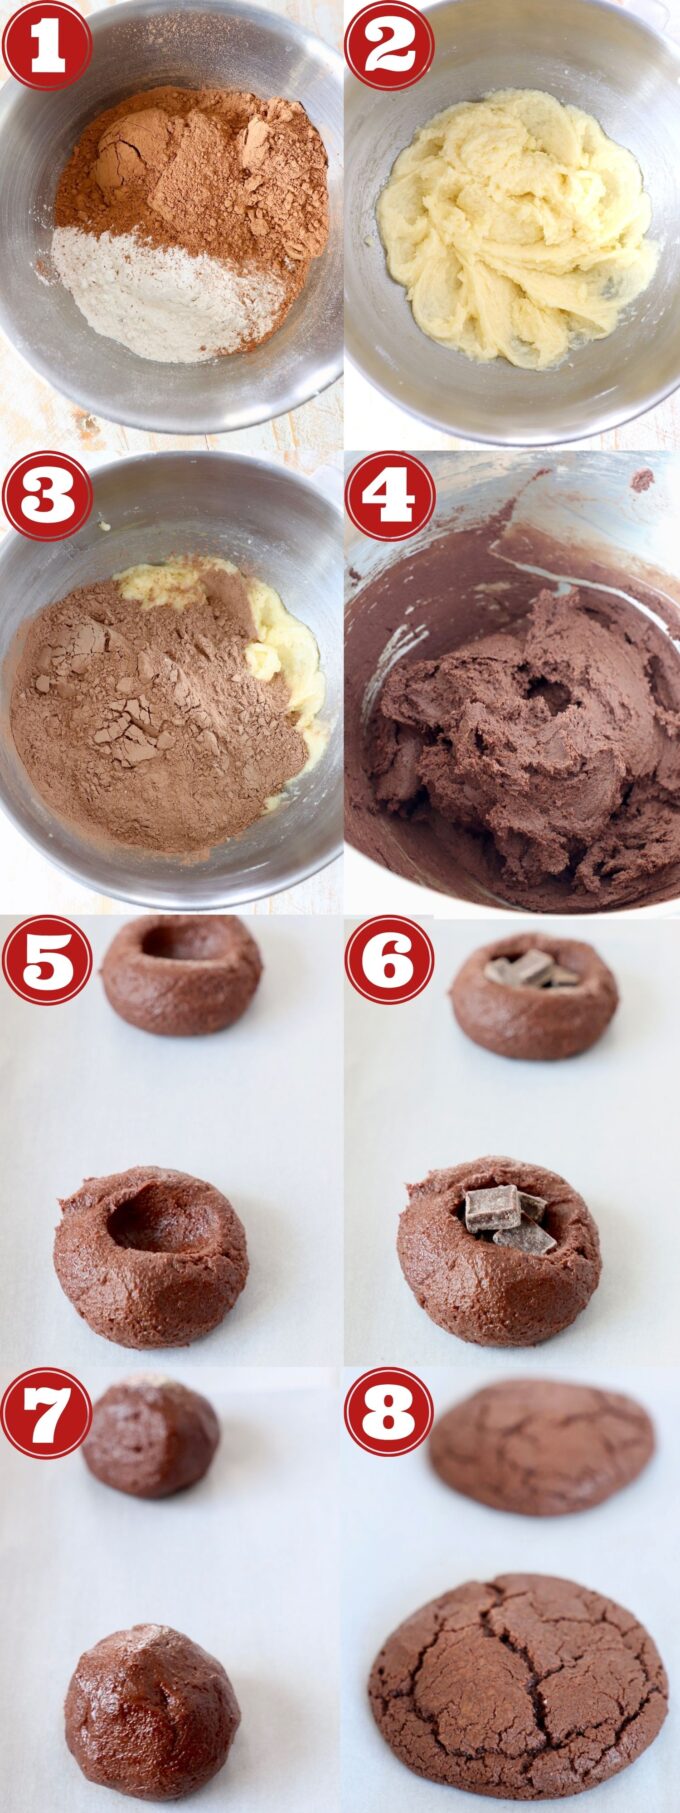 collage of images showing how to make chocolate cookies